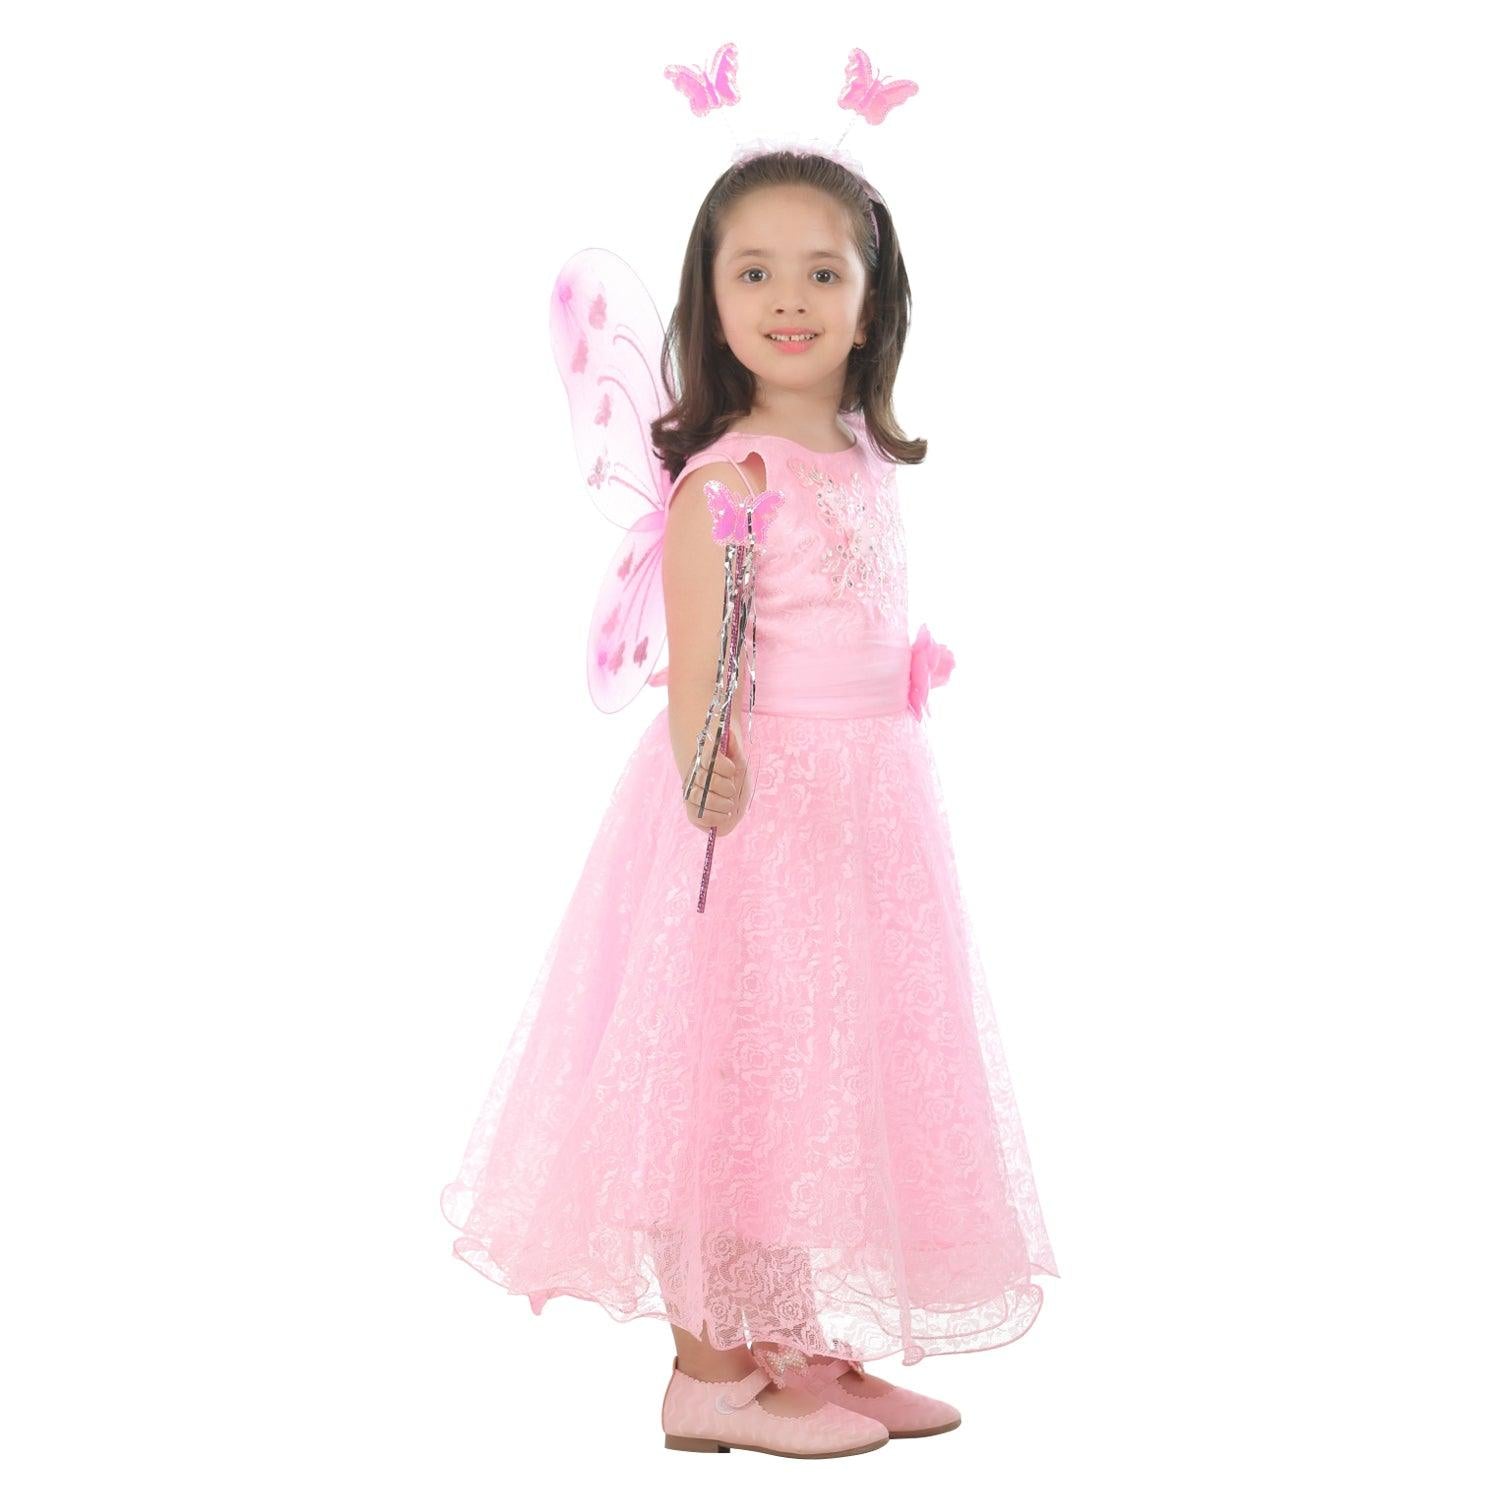 SR Creation Self Design Rani Pari Net Gown For Girl - Buy SR Creation Self  Design Rani Pari Net Gown For Girl Online at Low Price - Snapdeal